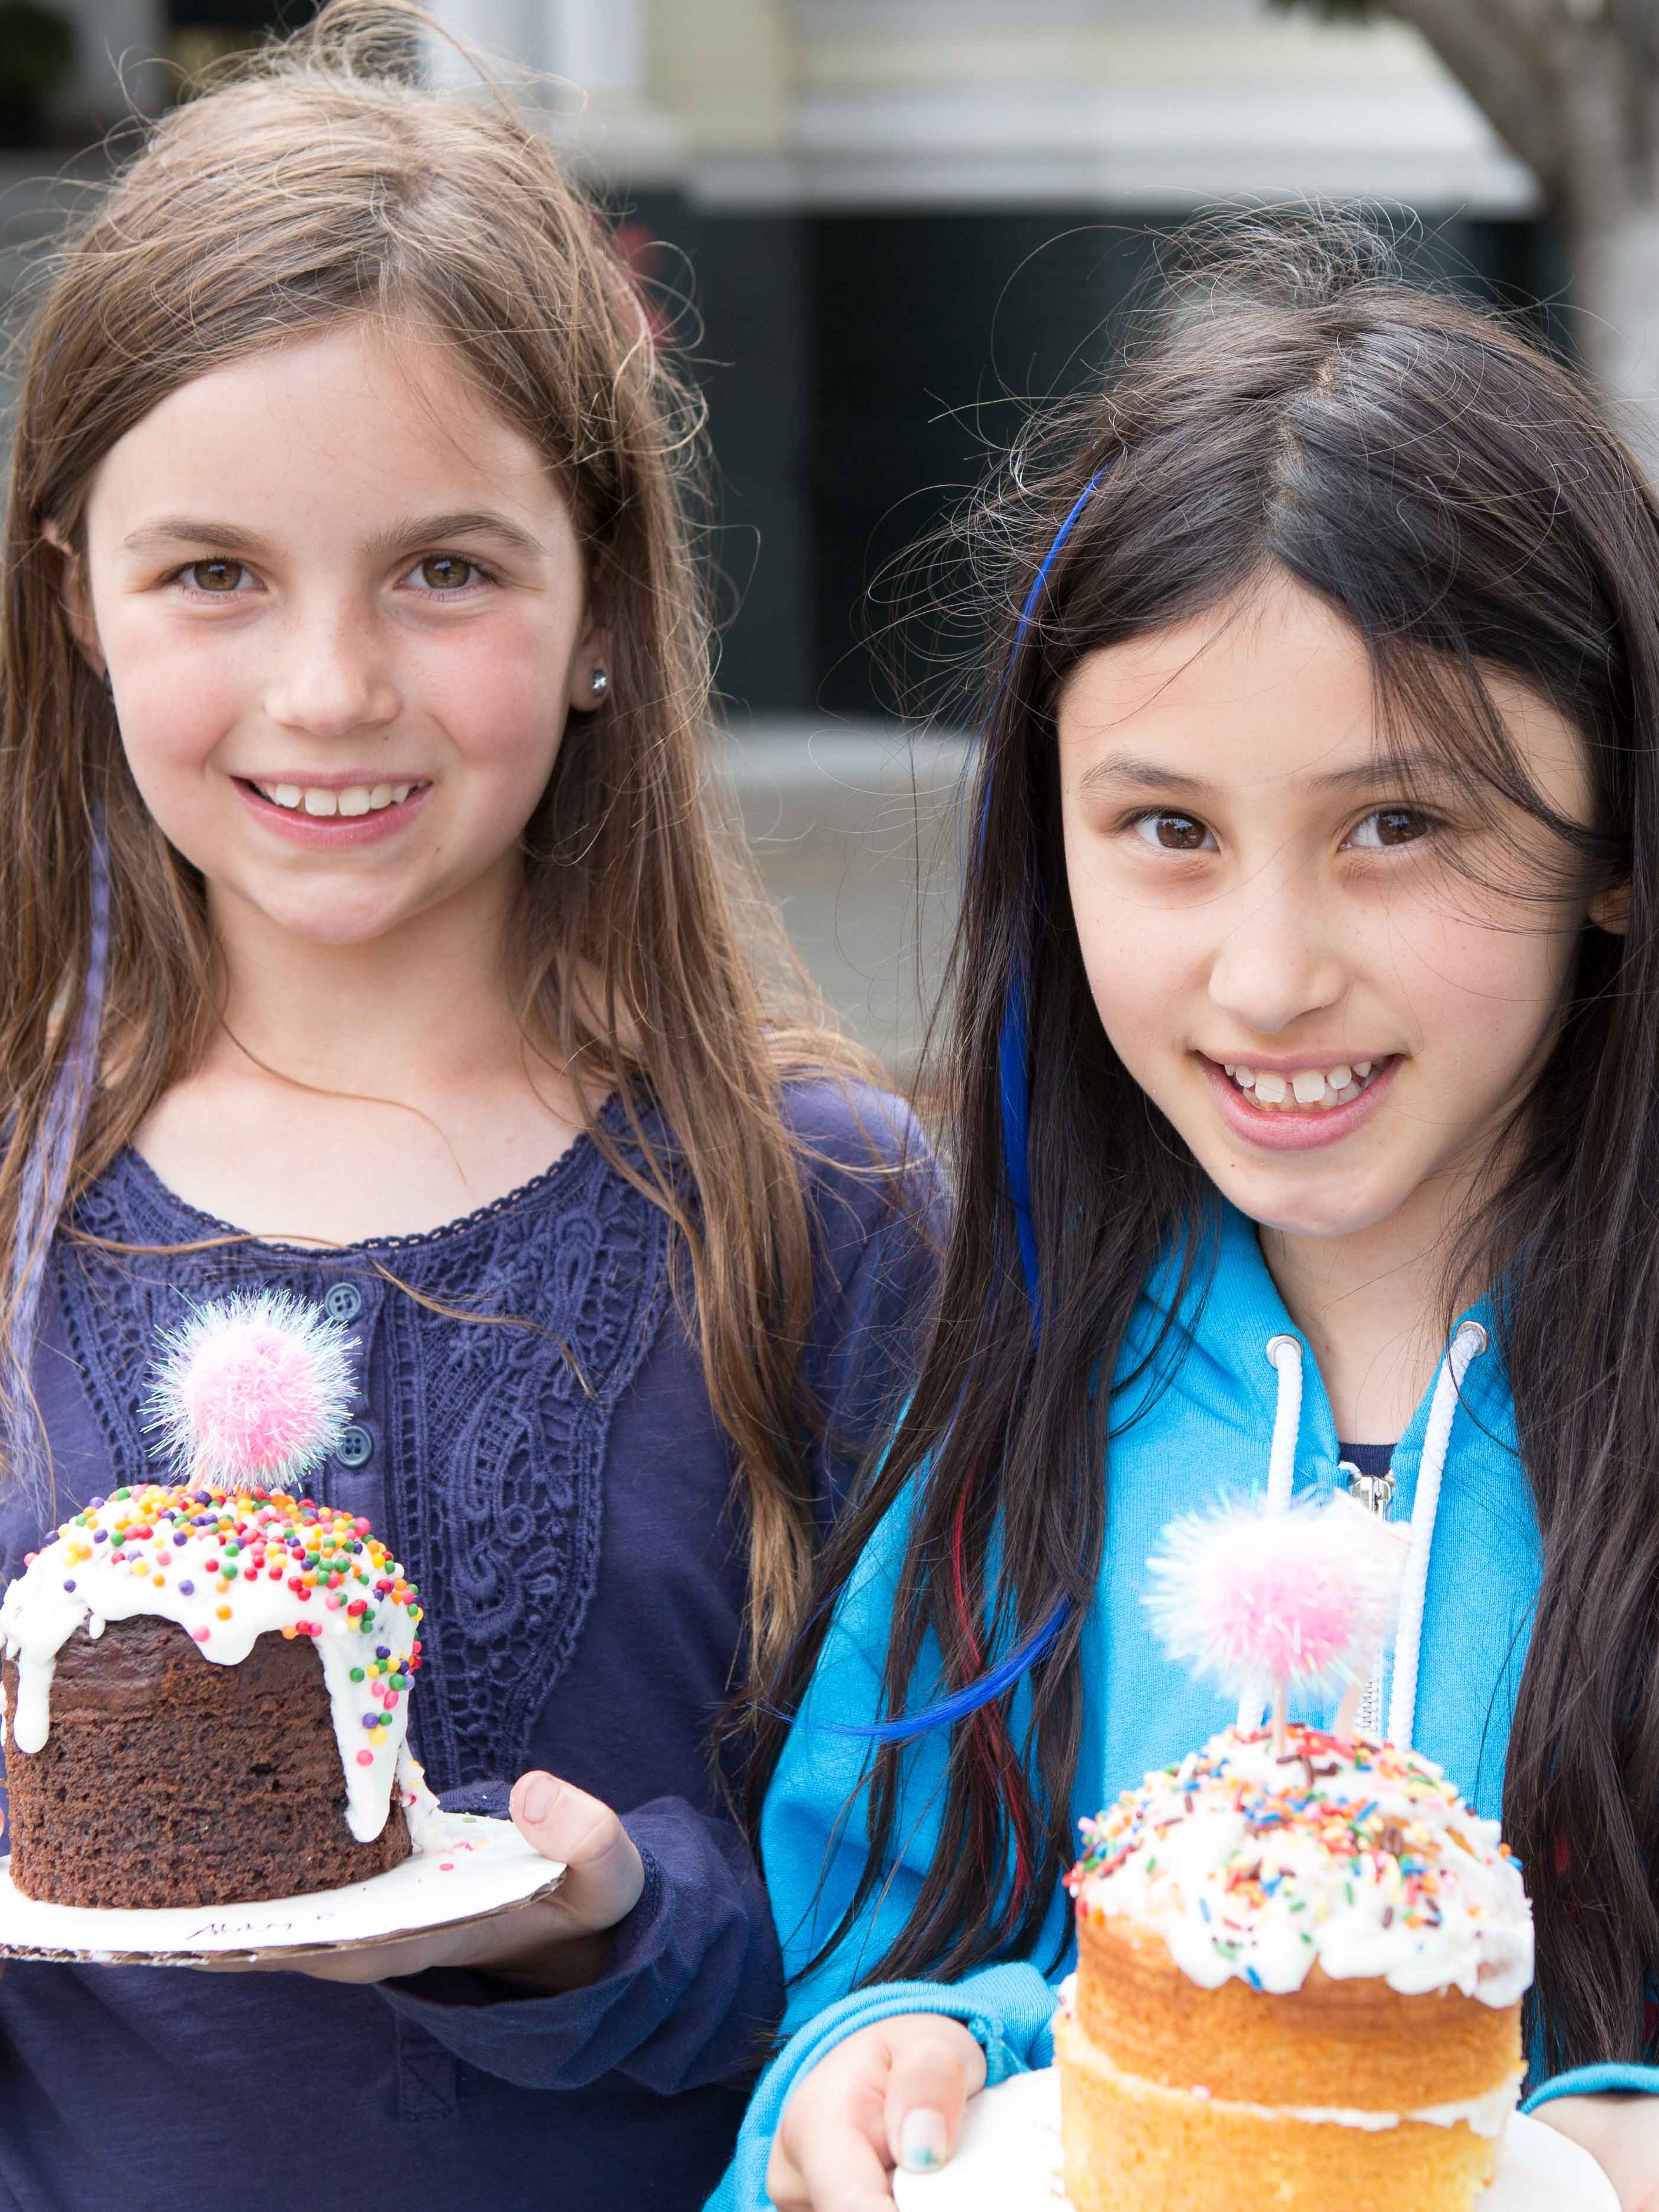 Two girls holding decorated cupcakes at an outdoor school festival